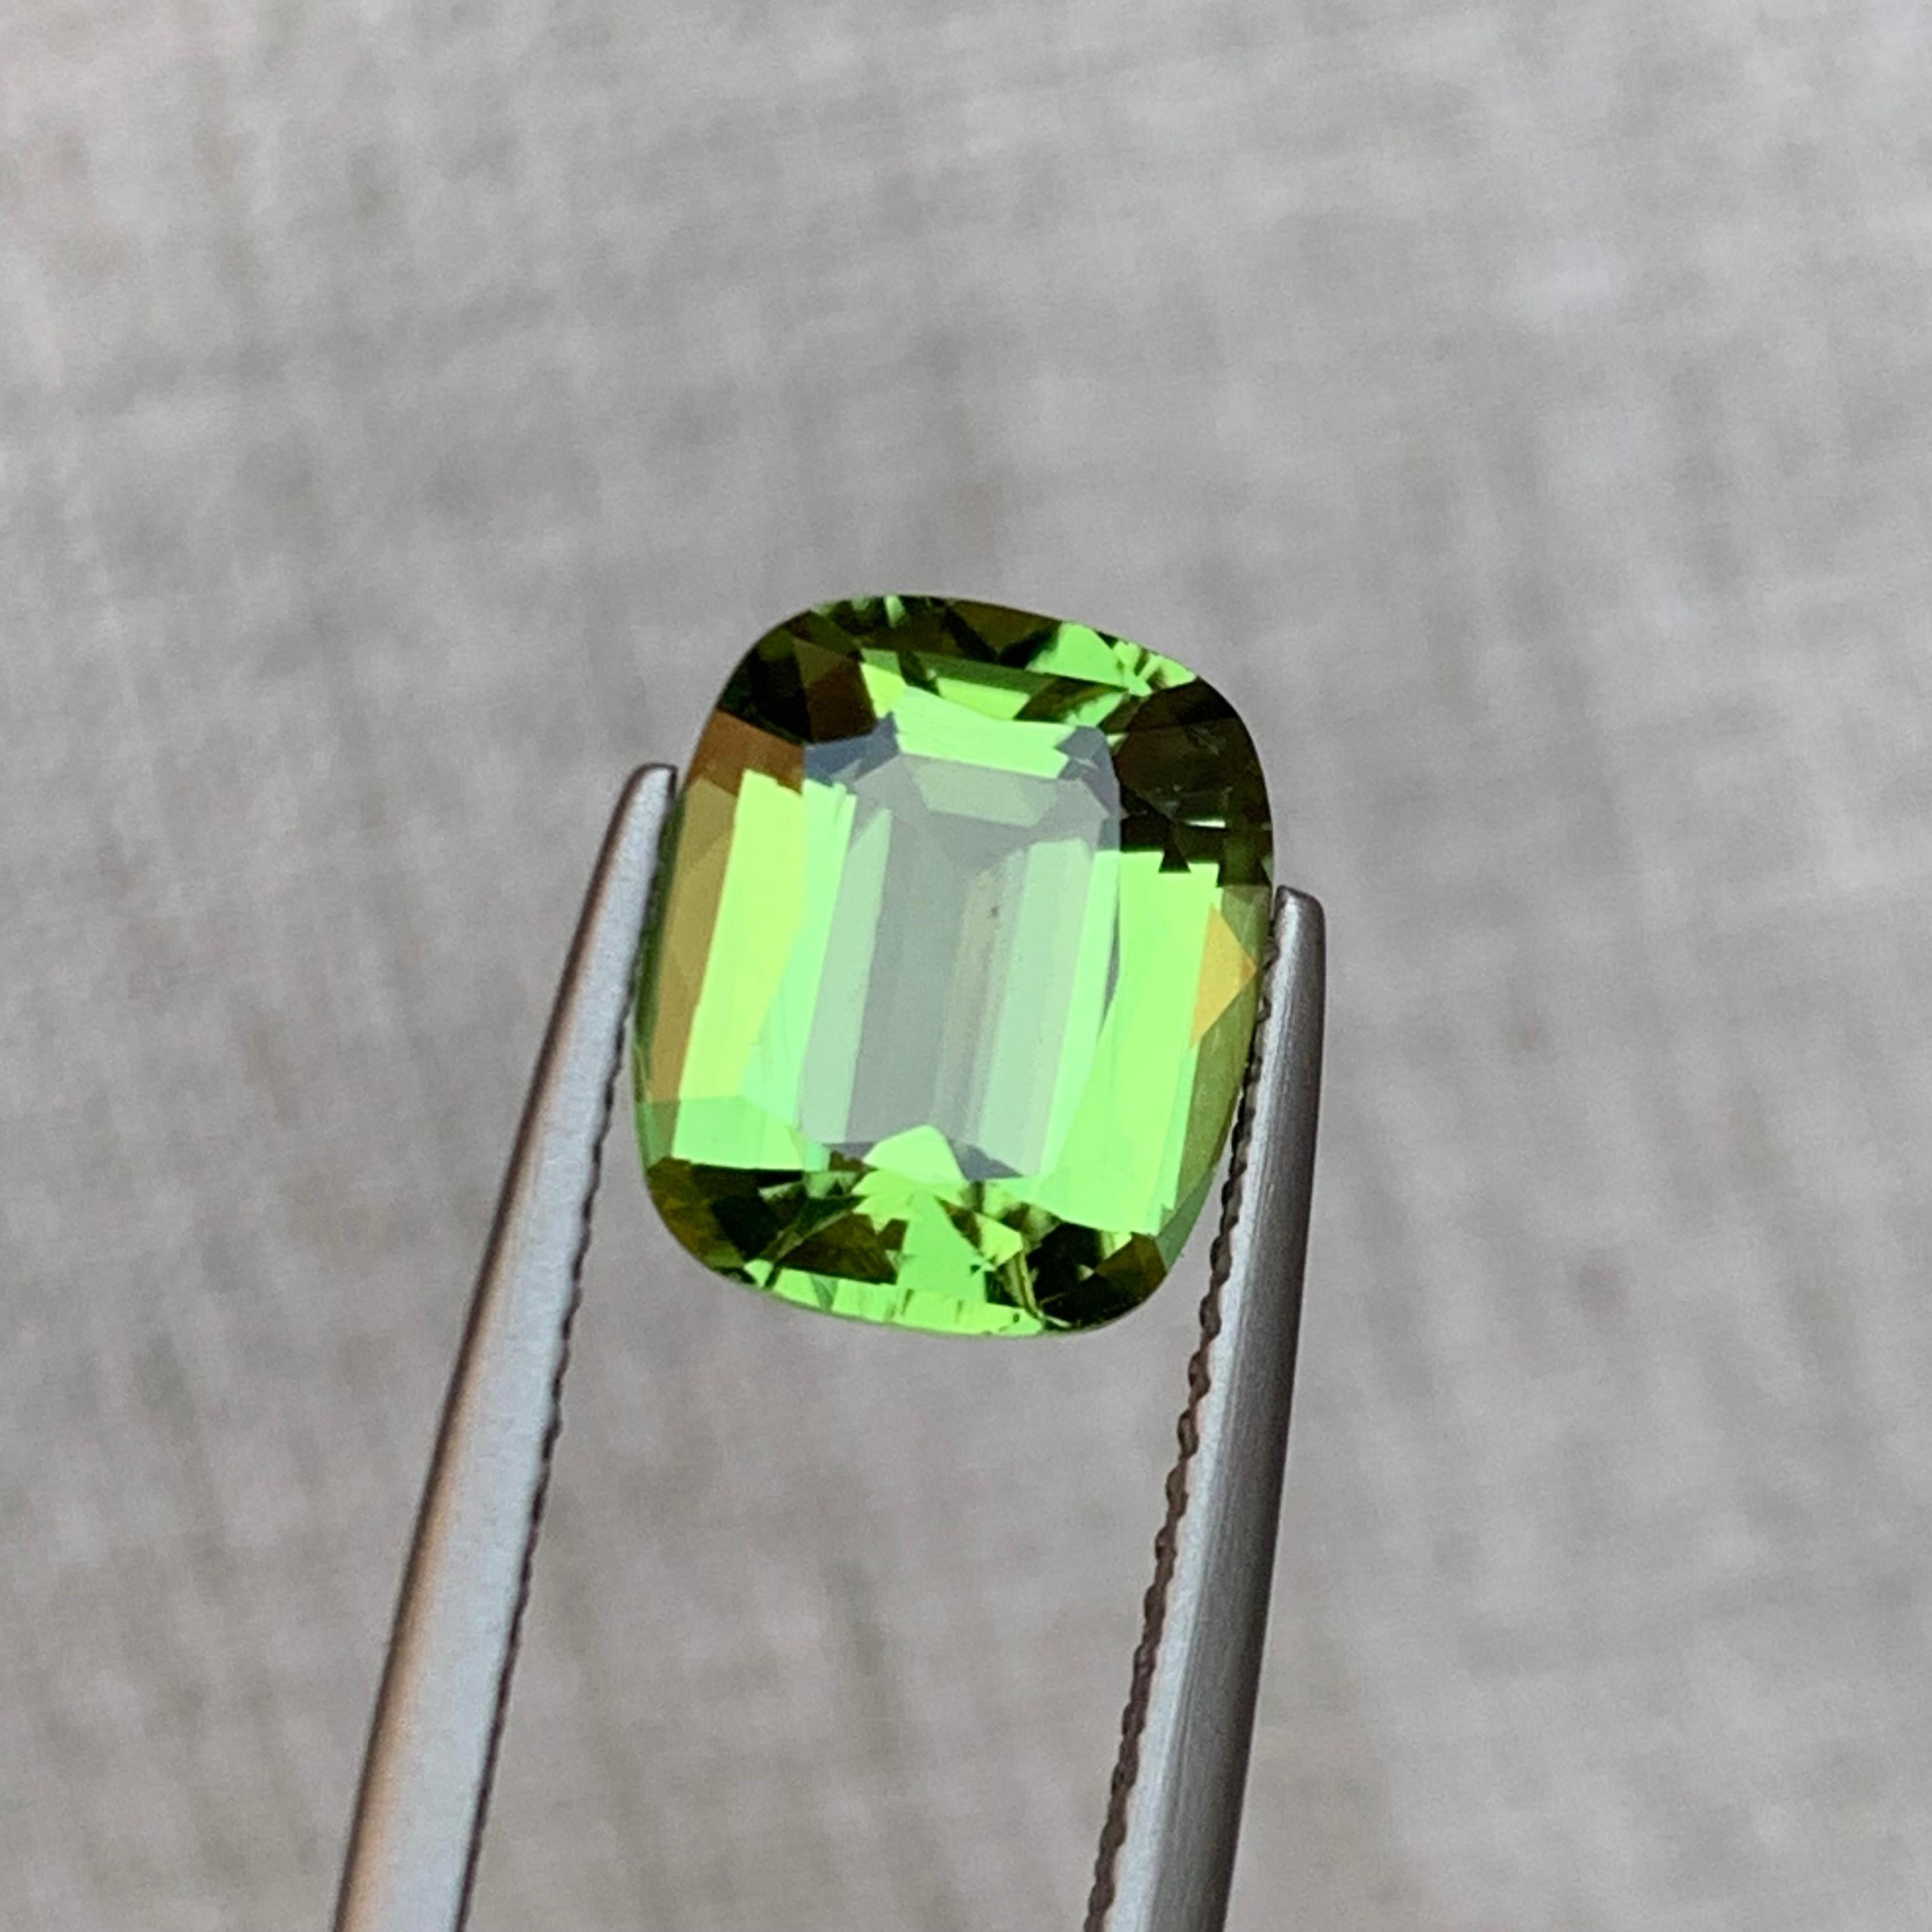 Gemstone Type: Tourmaline
Weight: 1.90 Carats
Dimensions: 8.09 x 7.38 x 4.73 mm
Color: Apple Green
Clarity: Eye Clean
Treatment: untreated
Origin: Afghanistan
Certificate: On demand 

Elevate your jewelry collection with this Rare Apple Green Square